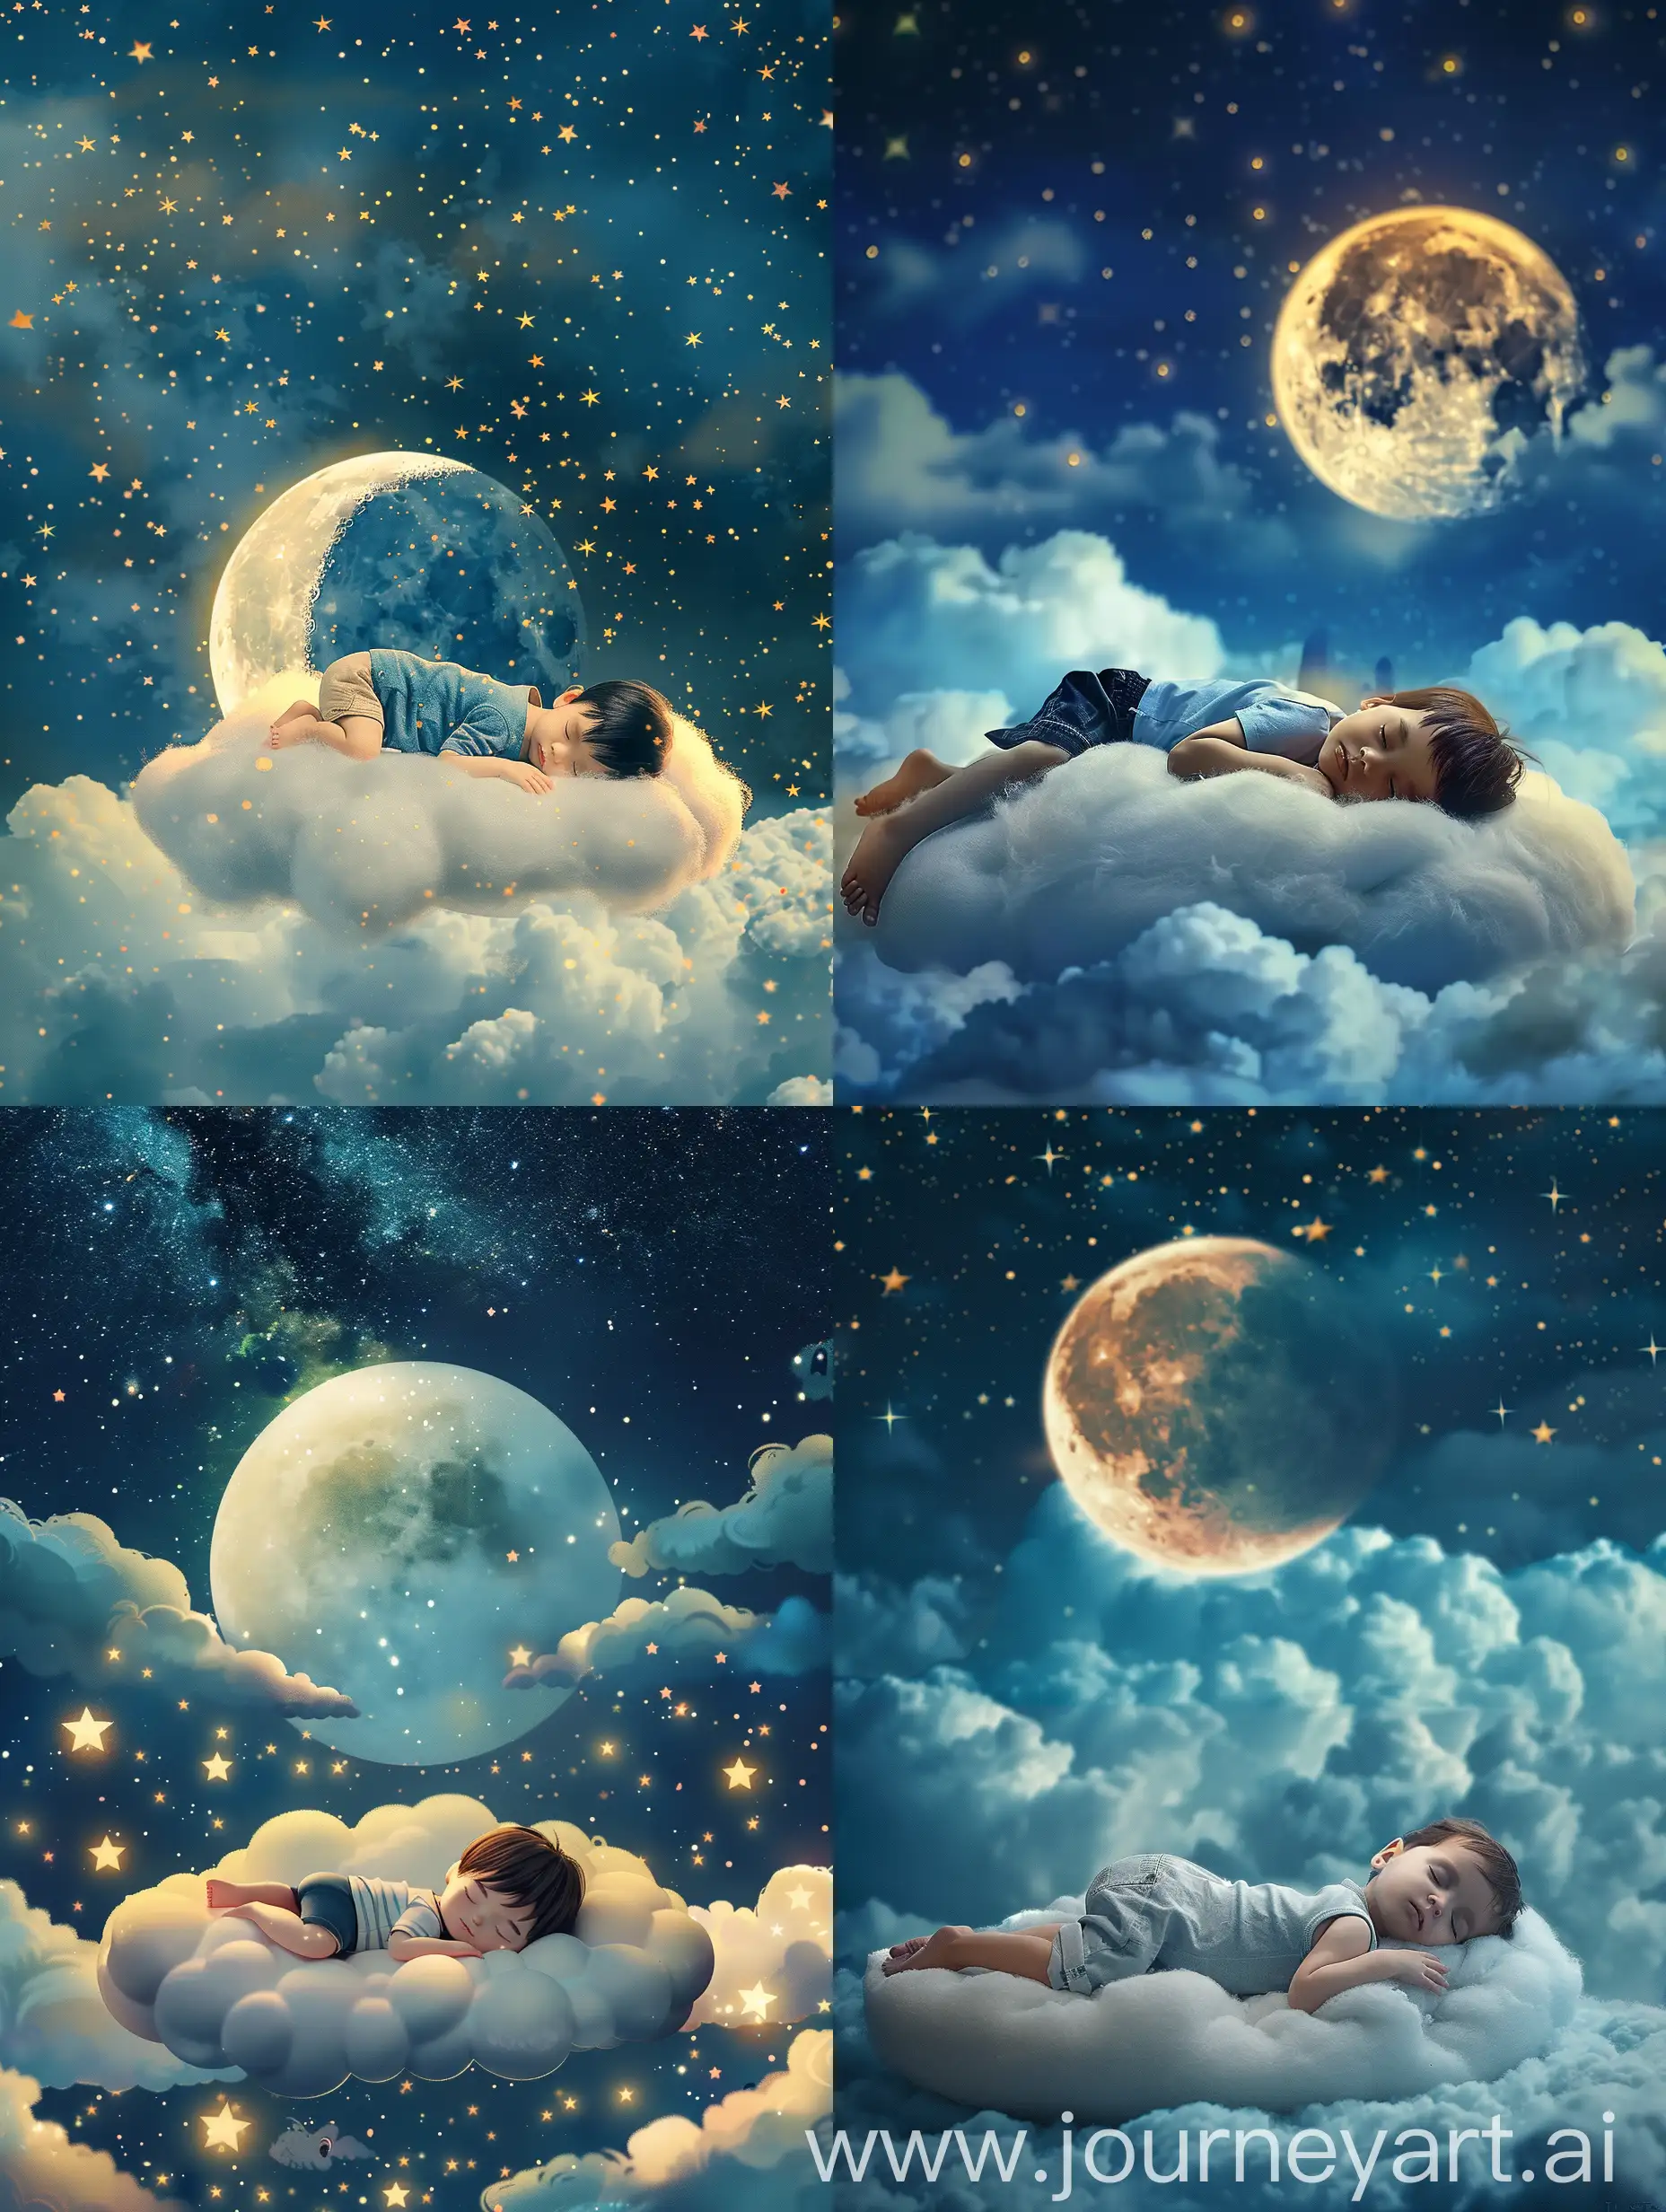 Adorable-Little-Boy-Sleeping-on-Cloud-Bed-under-Starlit-Sky-with-Big-Moon